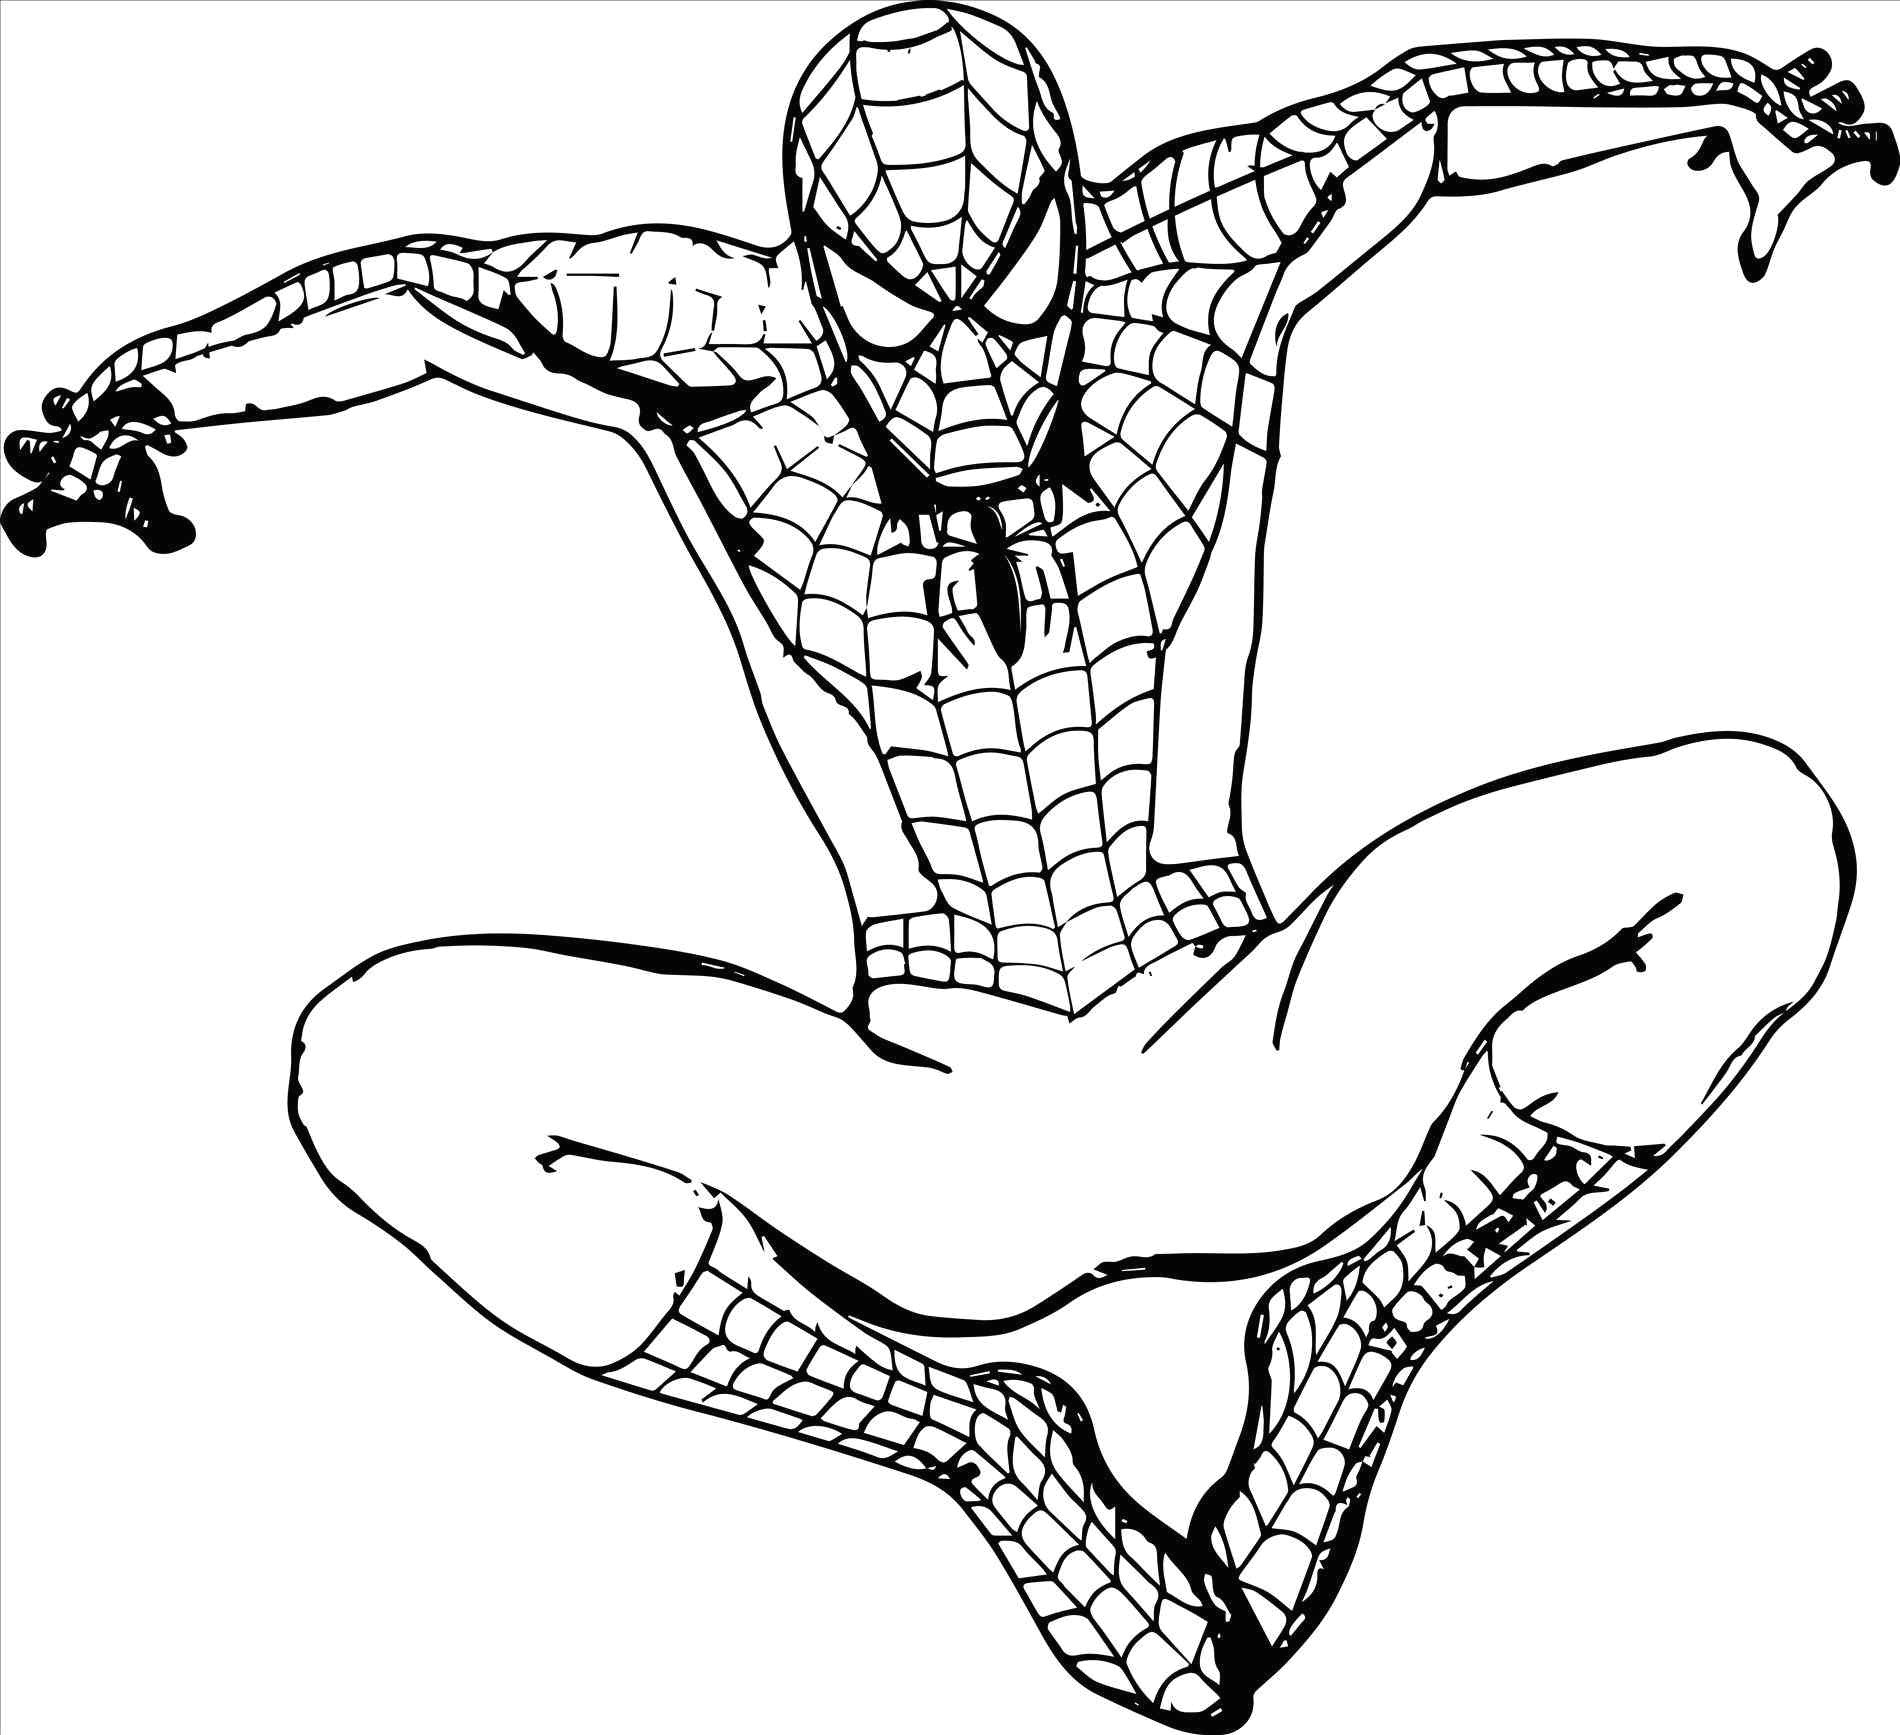 superheroes easy to draw spiderman coloring pages luxury 0 0d spiderman rituals you should of superheroes related post easy dragon drawing tutorial